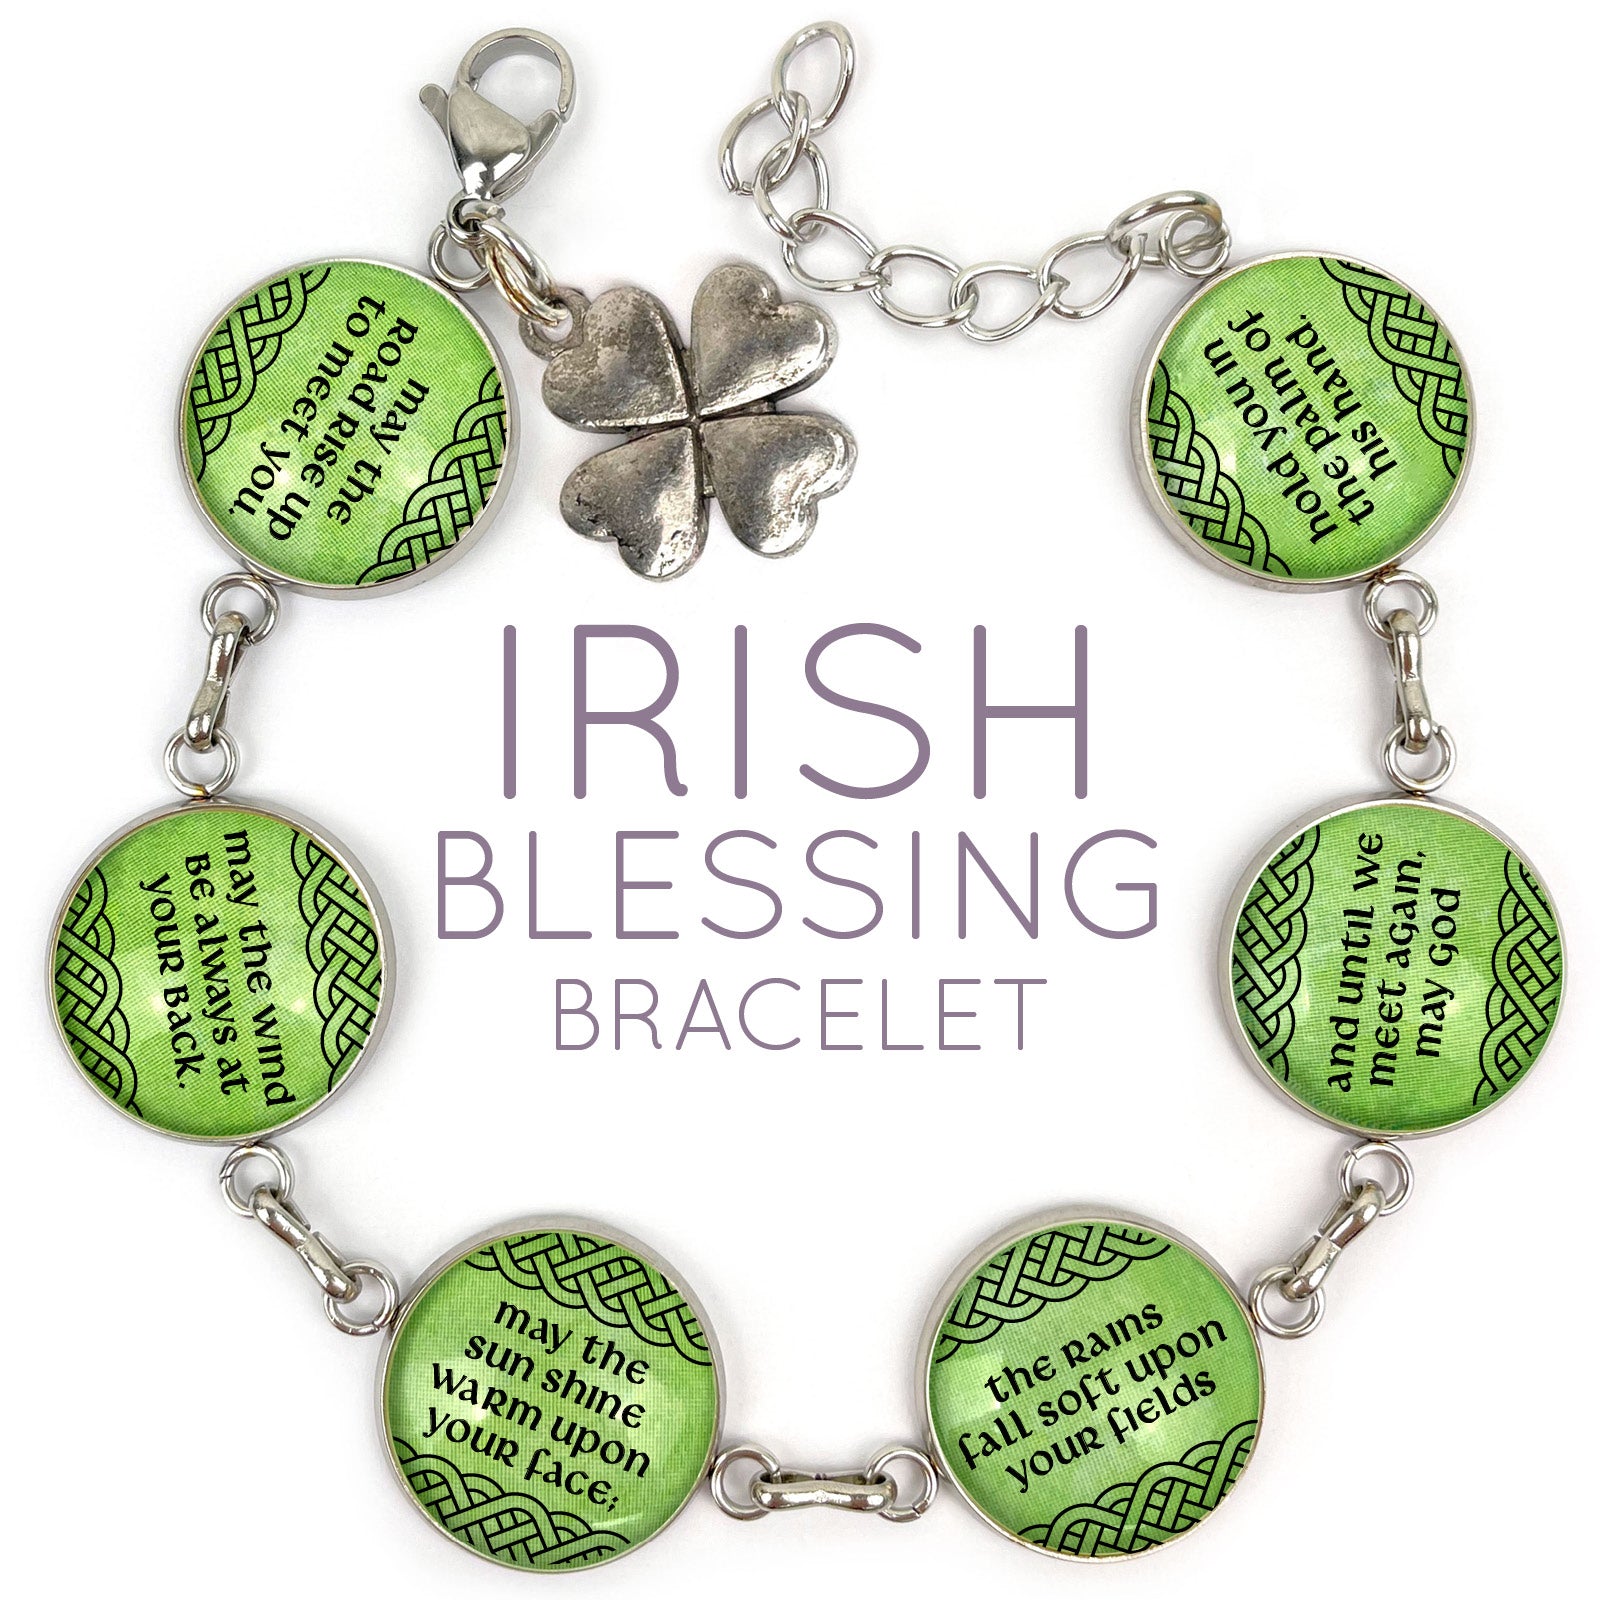 Irish Blessing Charm Bracelet - Stainless Steel or Silver-Plated with Green Glass Charms - Bracelets - Bijou Her -  -  - 